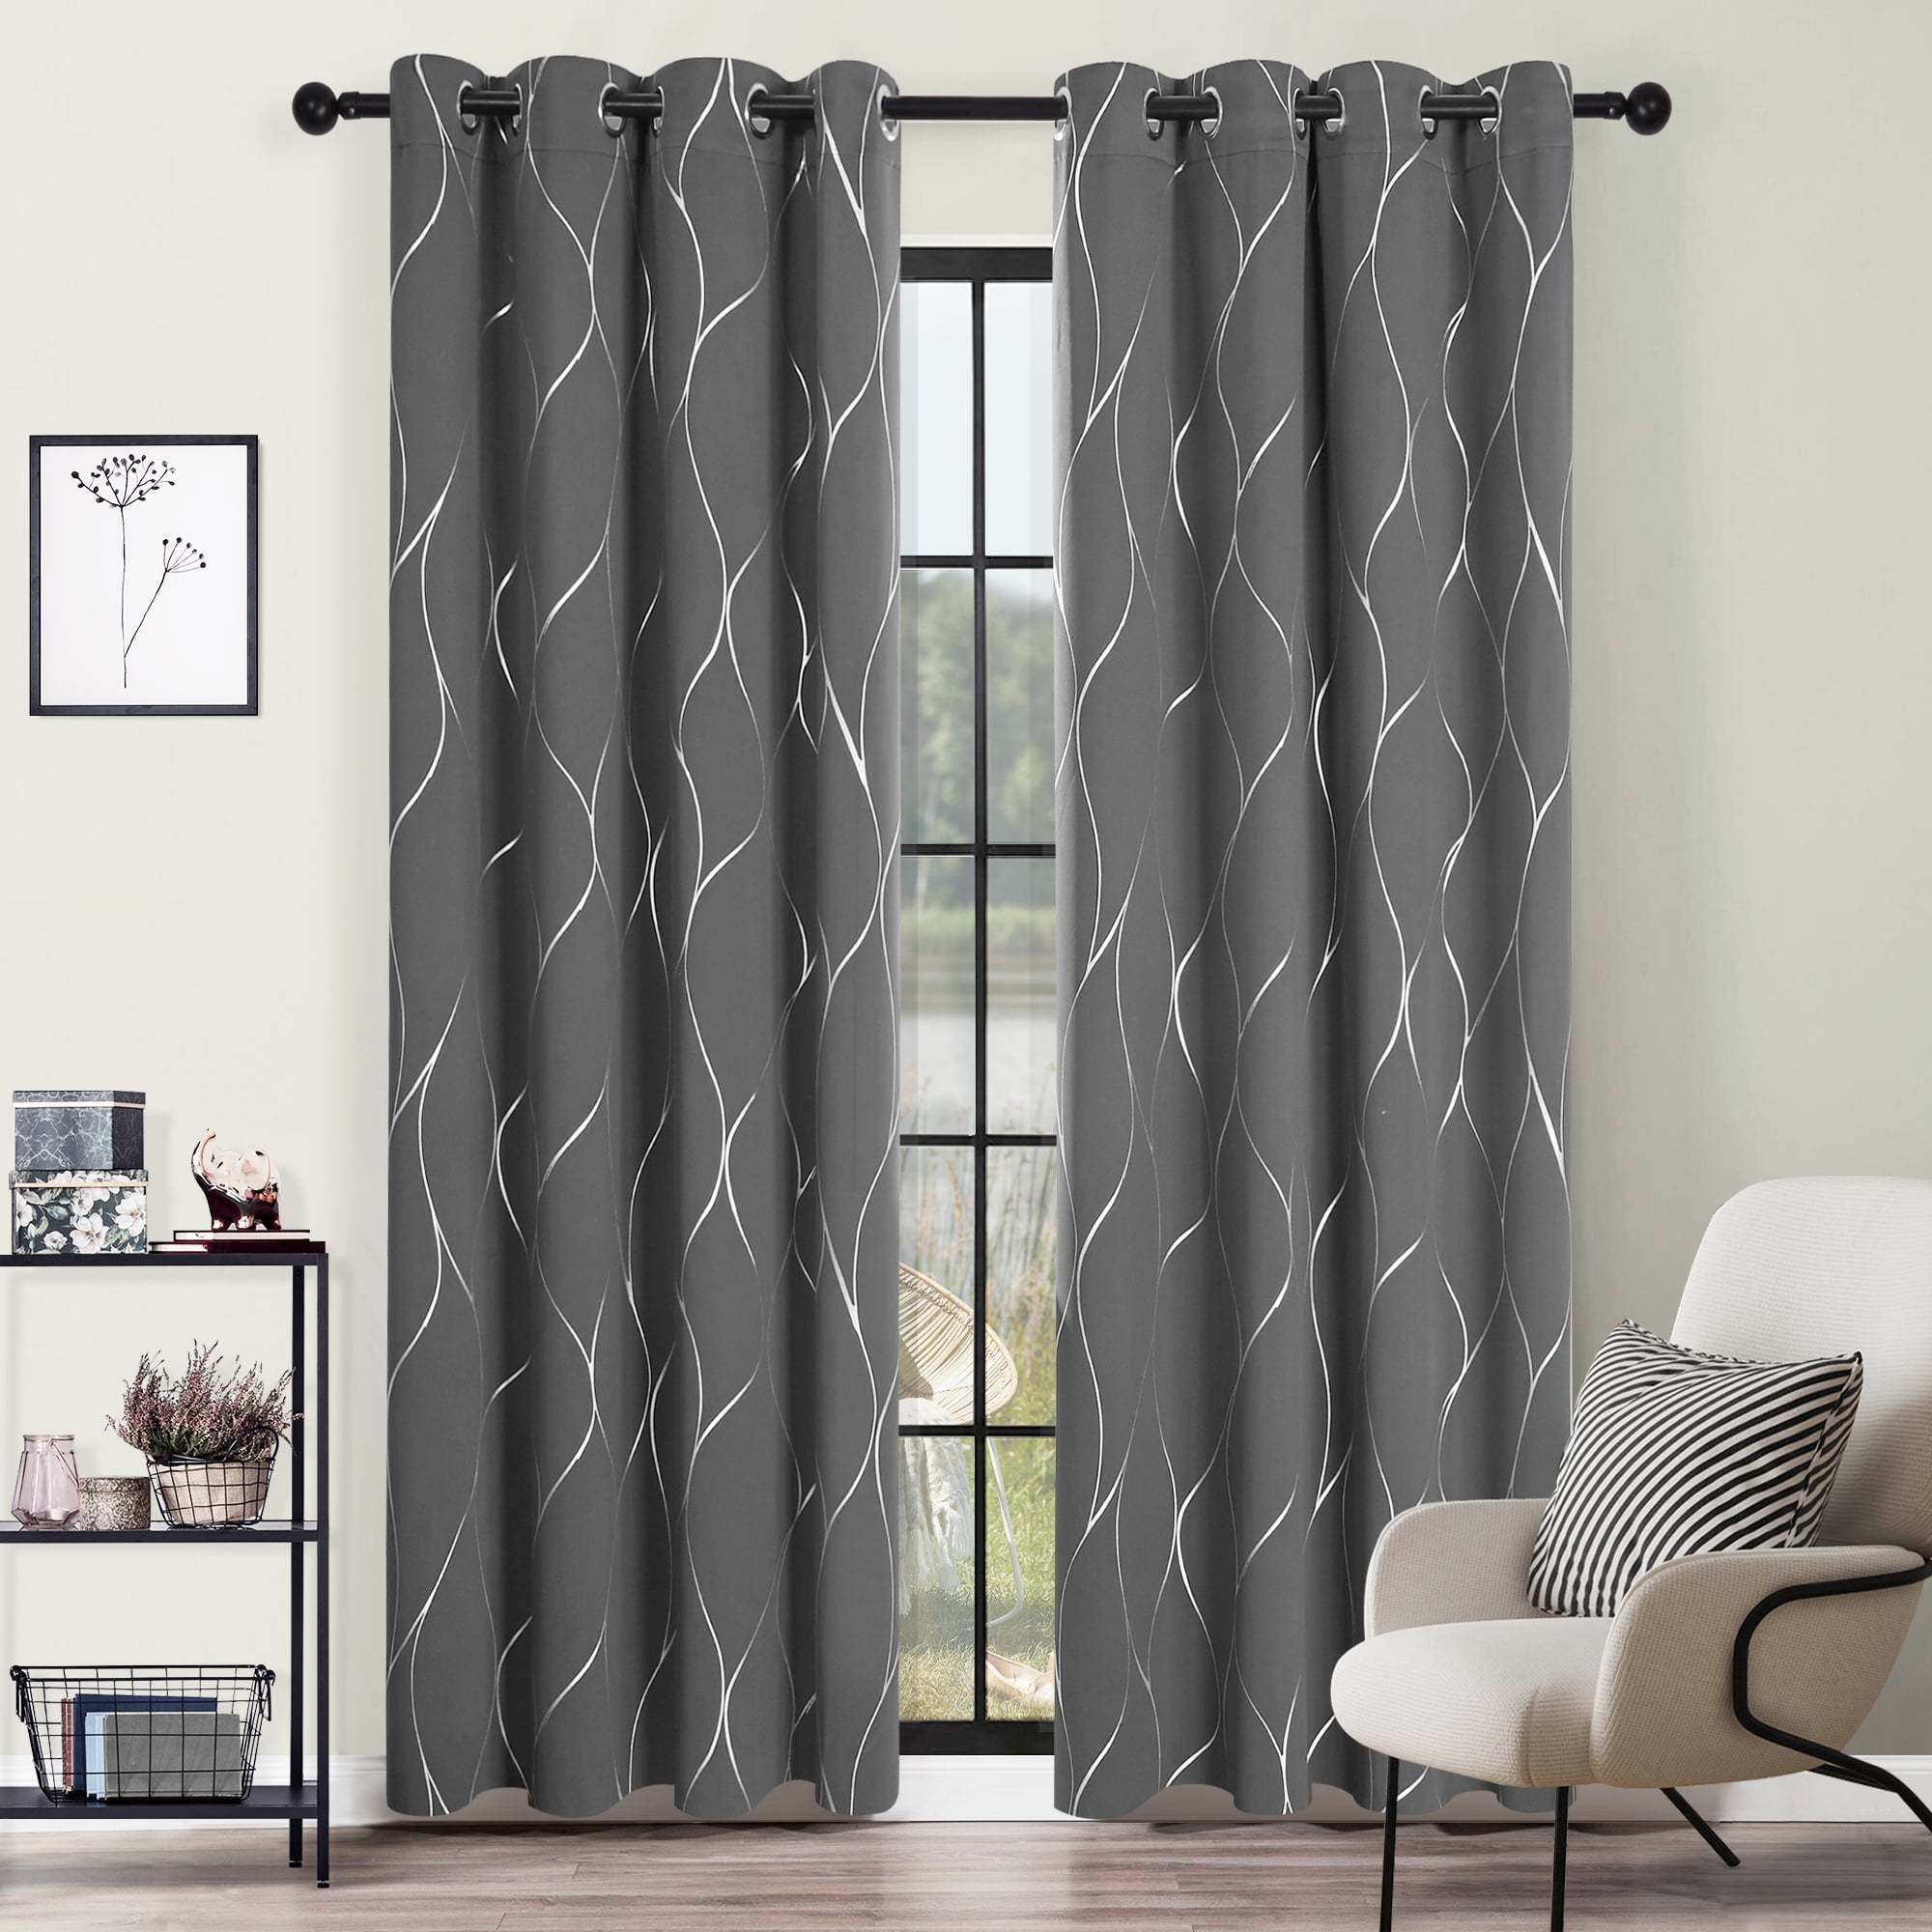 Soft Eyelet Curtains Solid Thermal Insulated Grommets Drapes Window Treatment for Bedroom/Living Room 2 Panels Beige Blackout Curtains W 46 by L 72 inch per Panel 